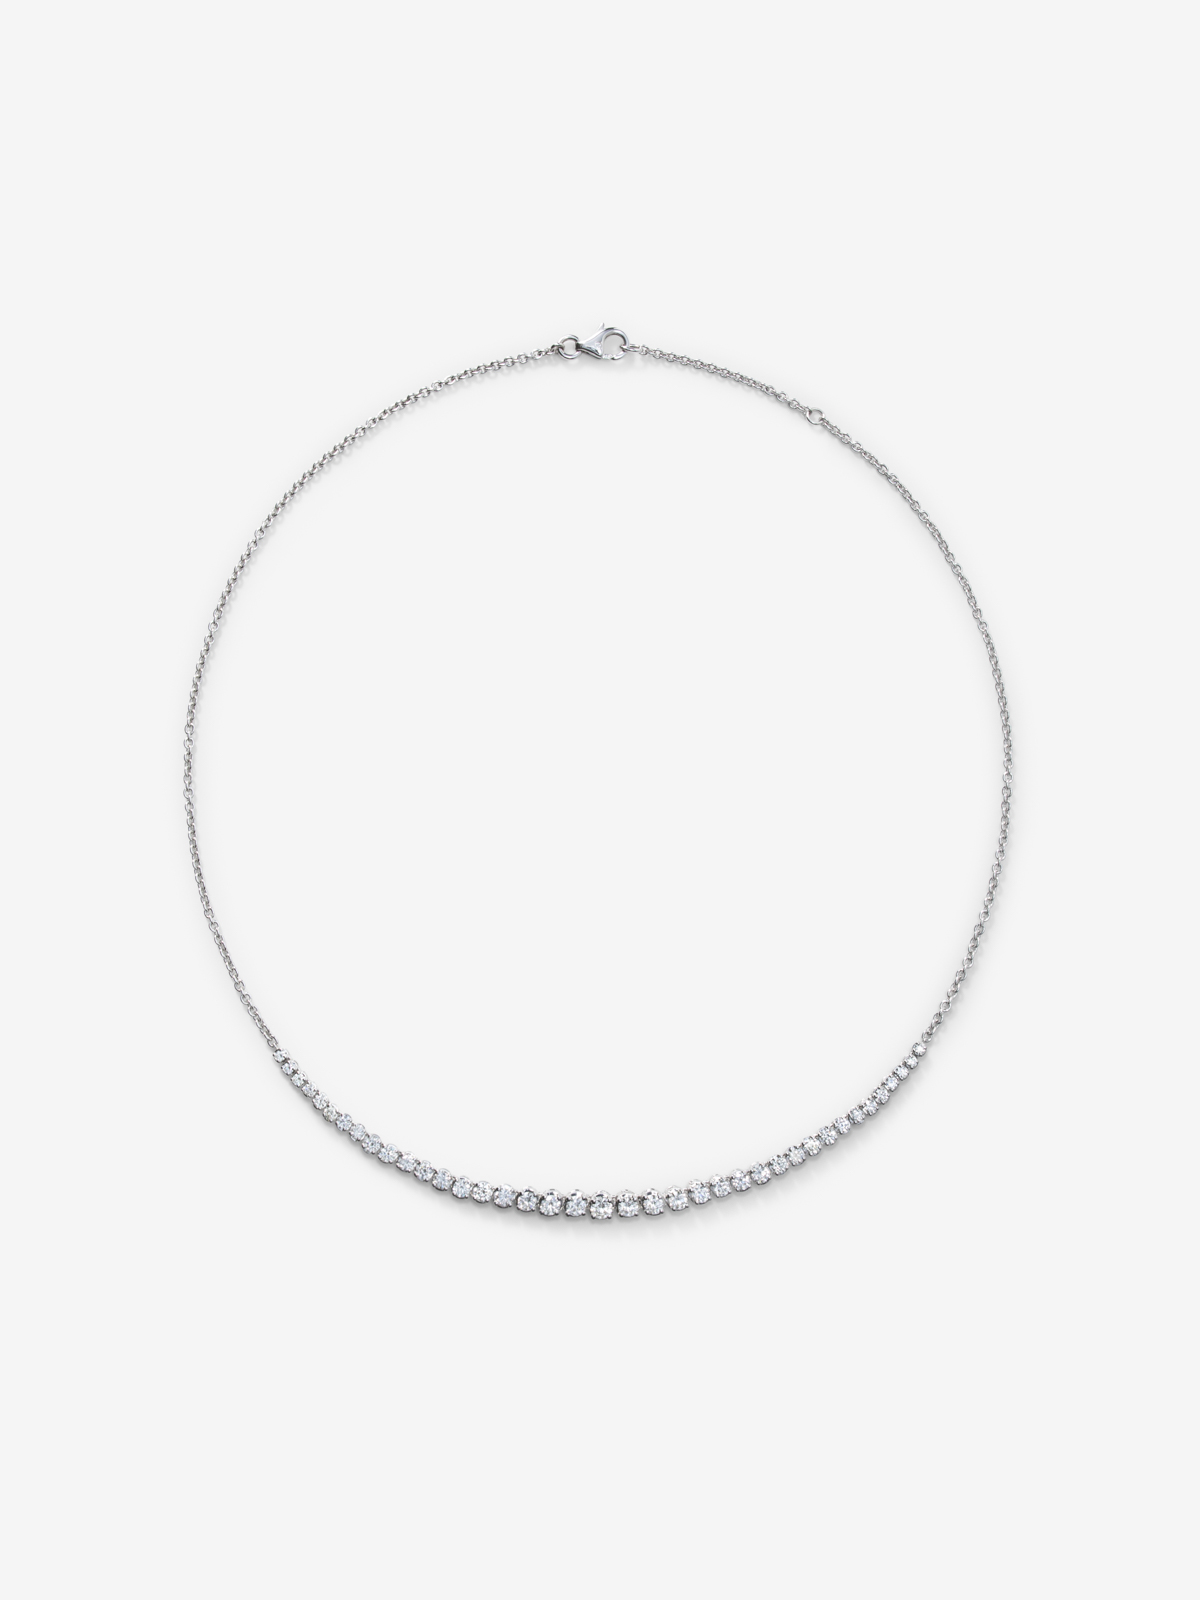 18k white gold pendant necklace with 1.93cts diamonds